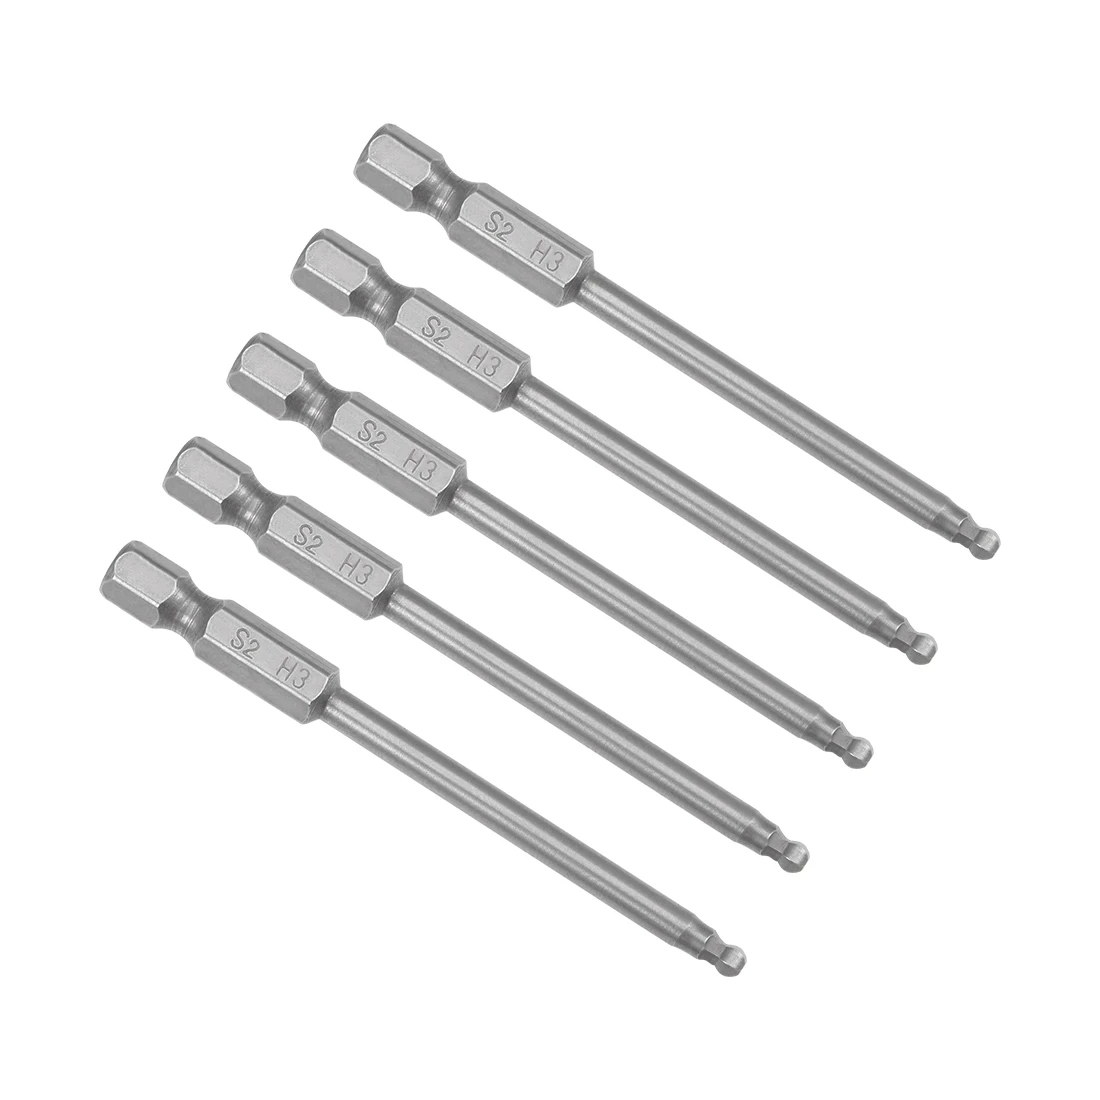 

uxcell 5 Pcs H3 (3mm) Ball End Screwdriver Bits, S2 Steel Magnetic 2.95 Inch Long Drill Bit with 1/4 Inch Hex Shank